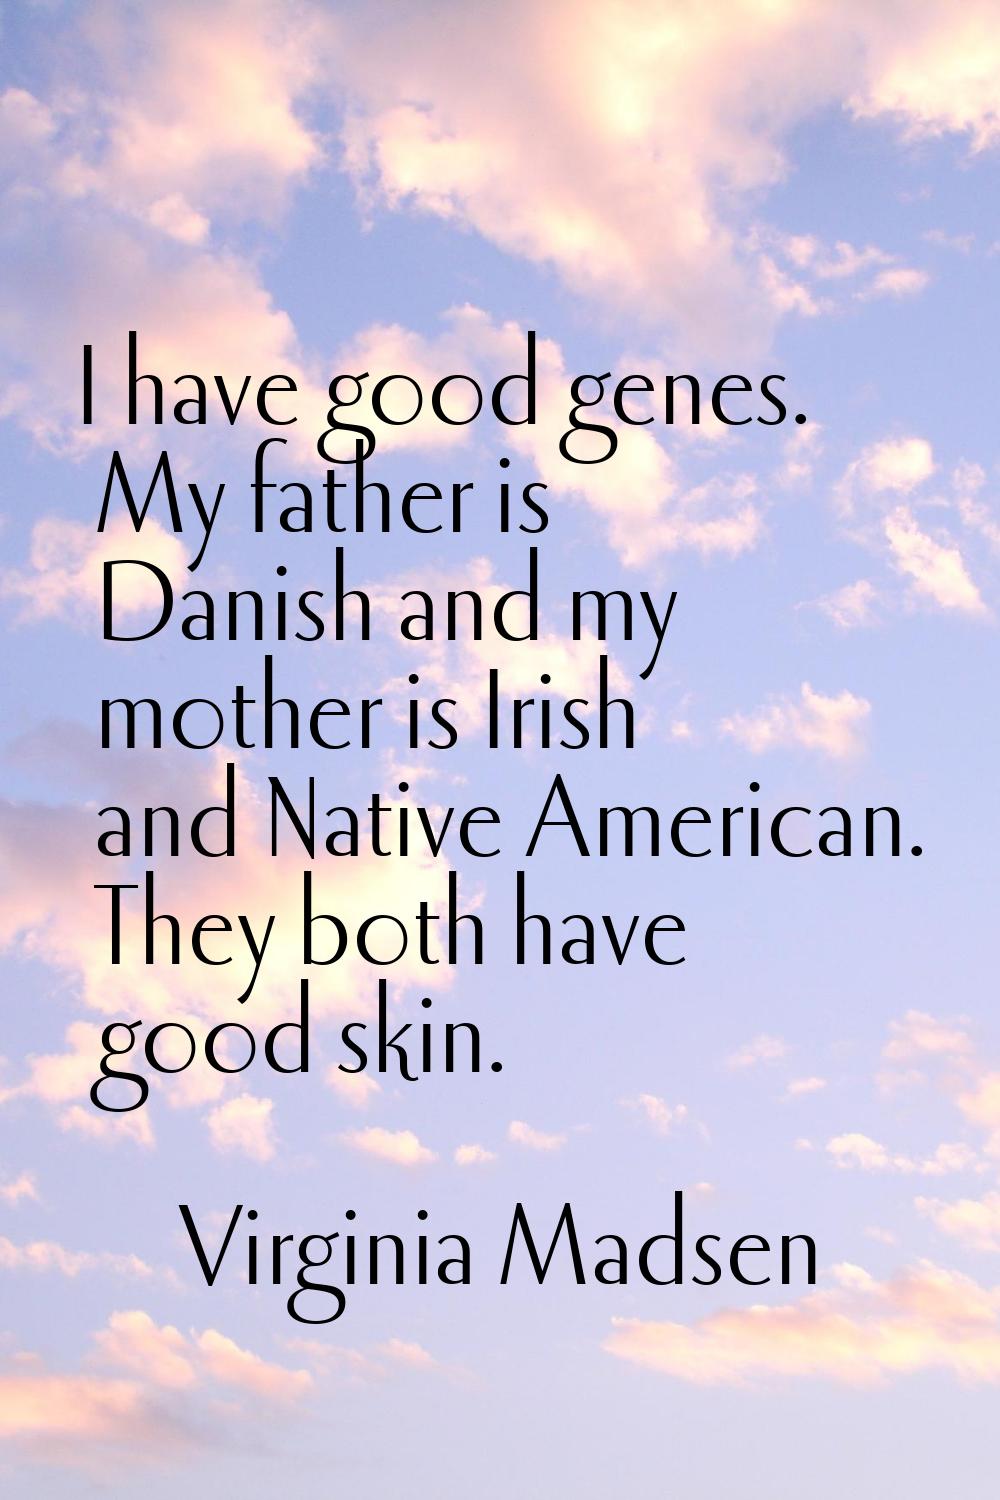 I have good genes. My father is Danish and my mother is Irish and Native American. They both have g